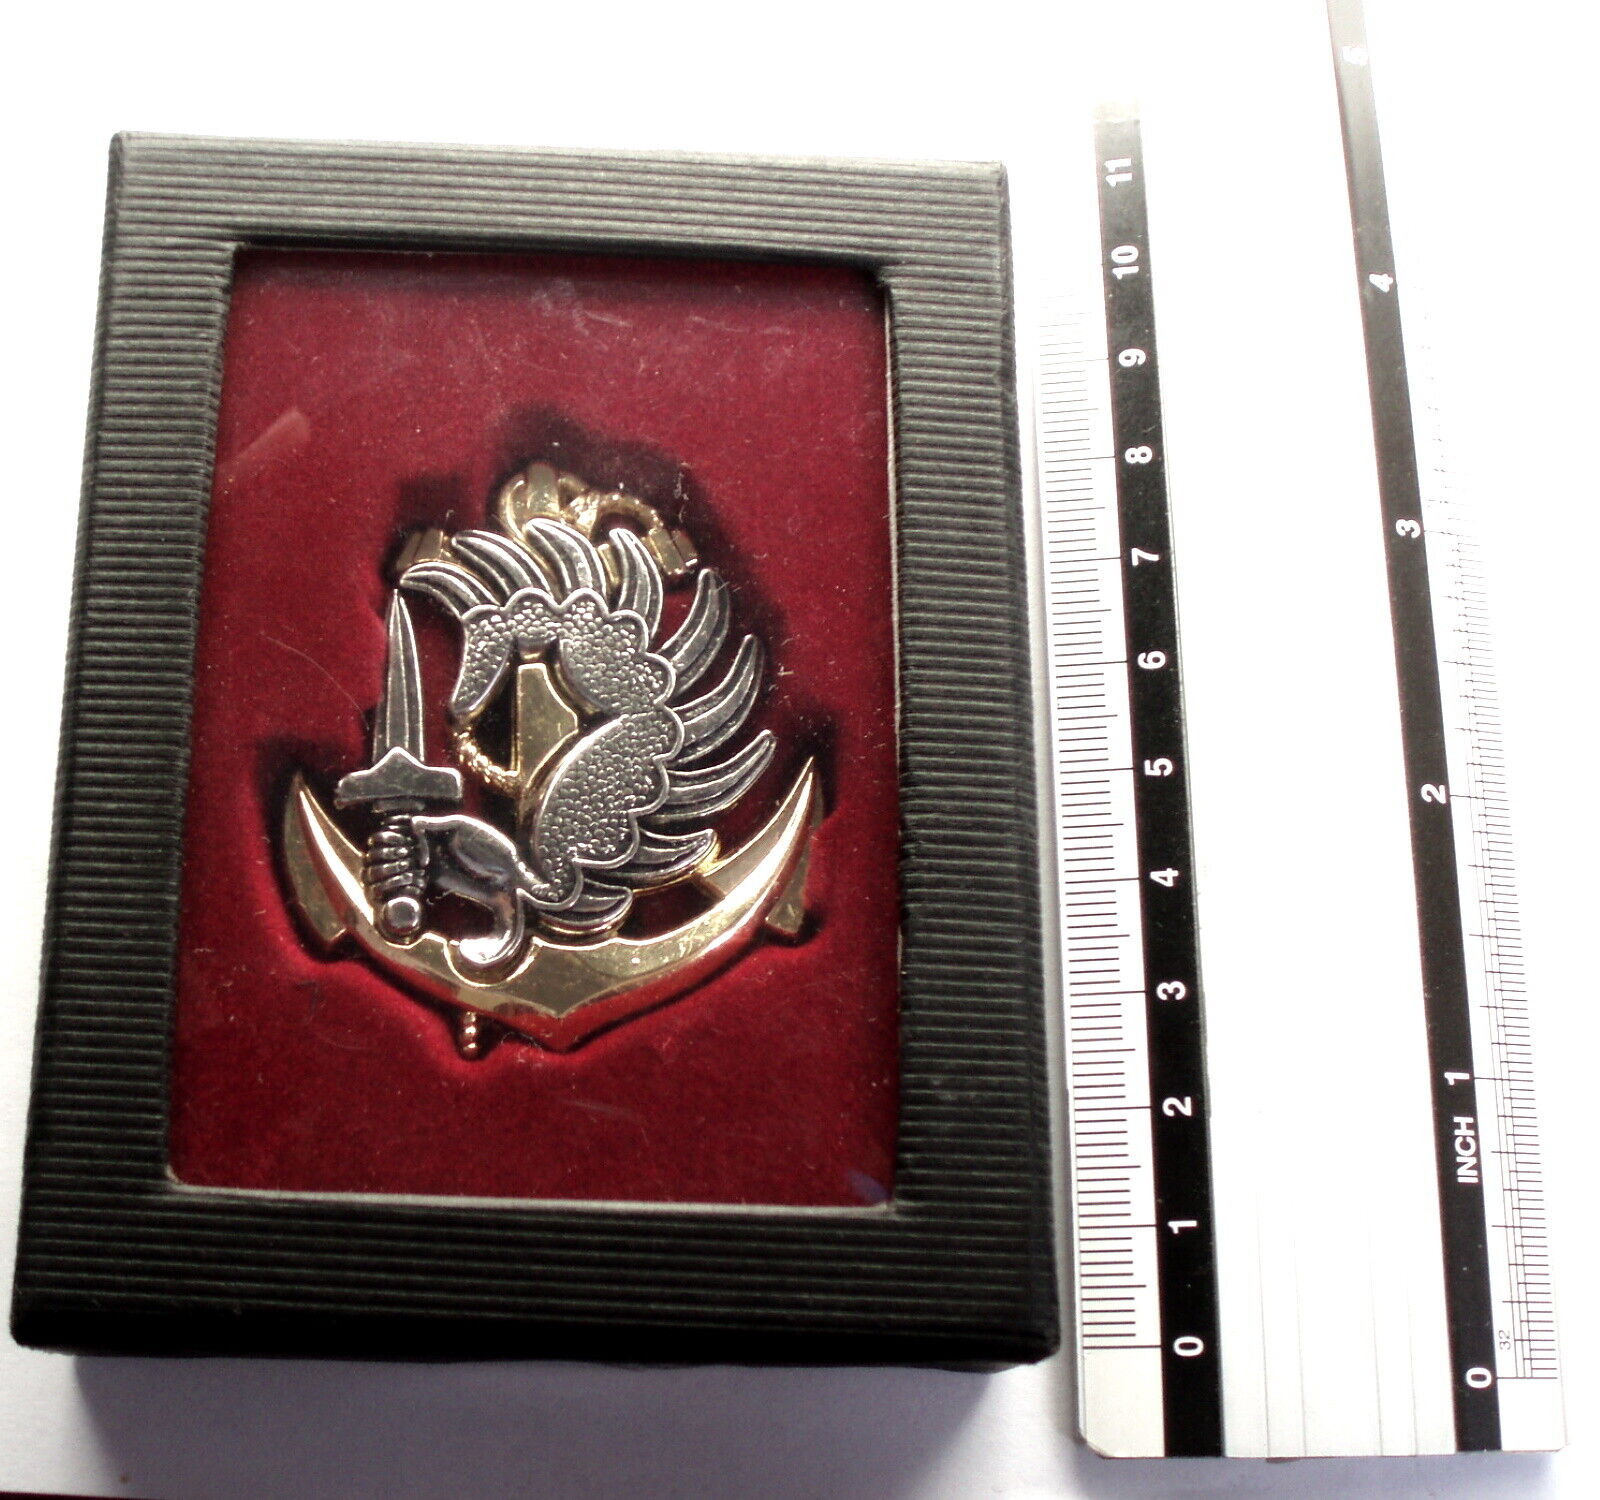 FRENCH COLONIAL MARINE PARATROOPER Badge Repro in Display Box.